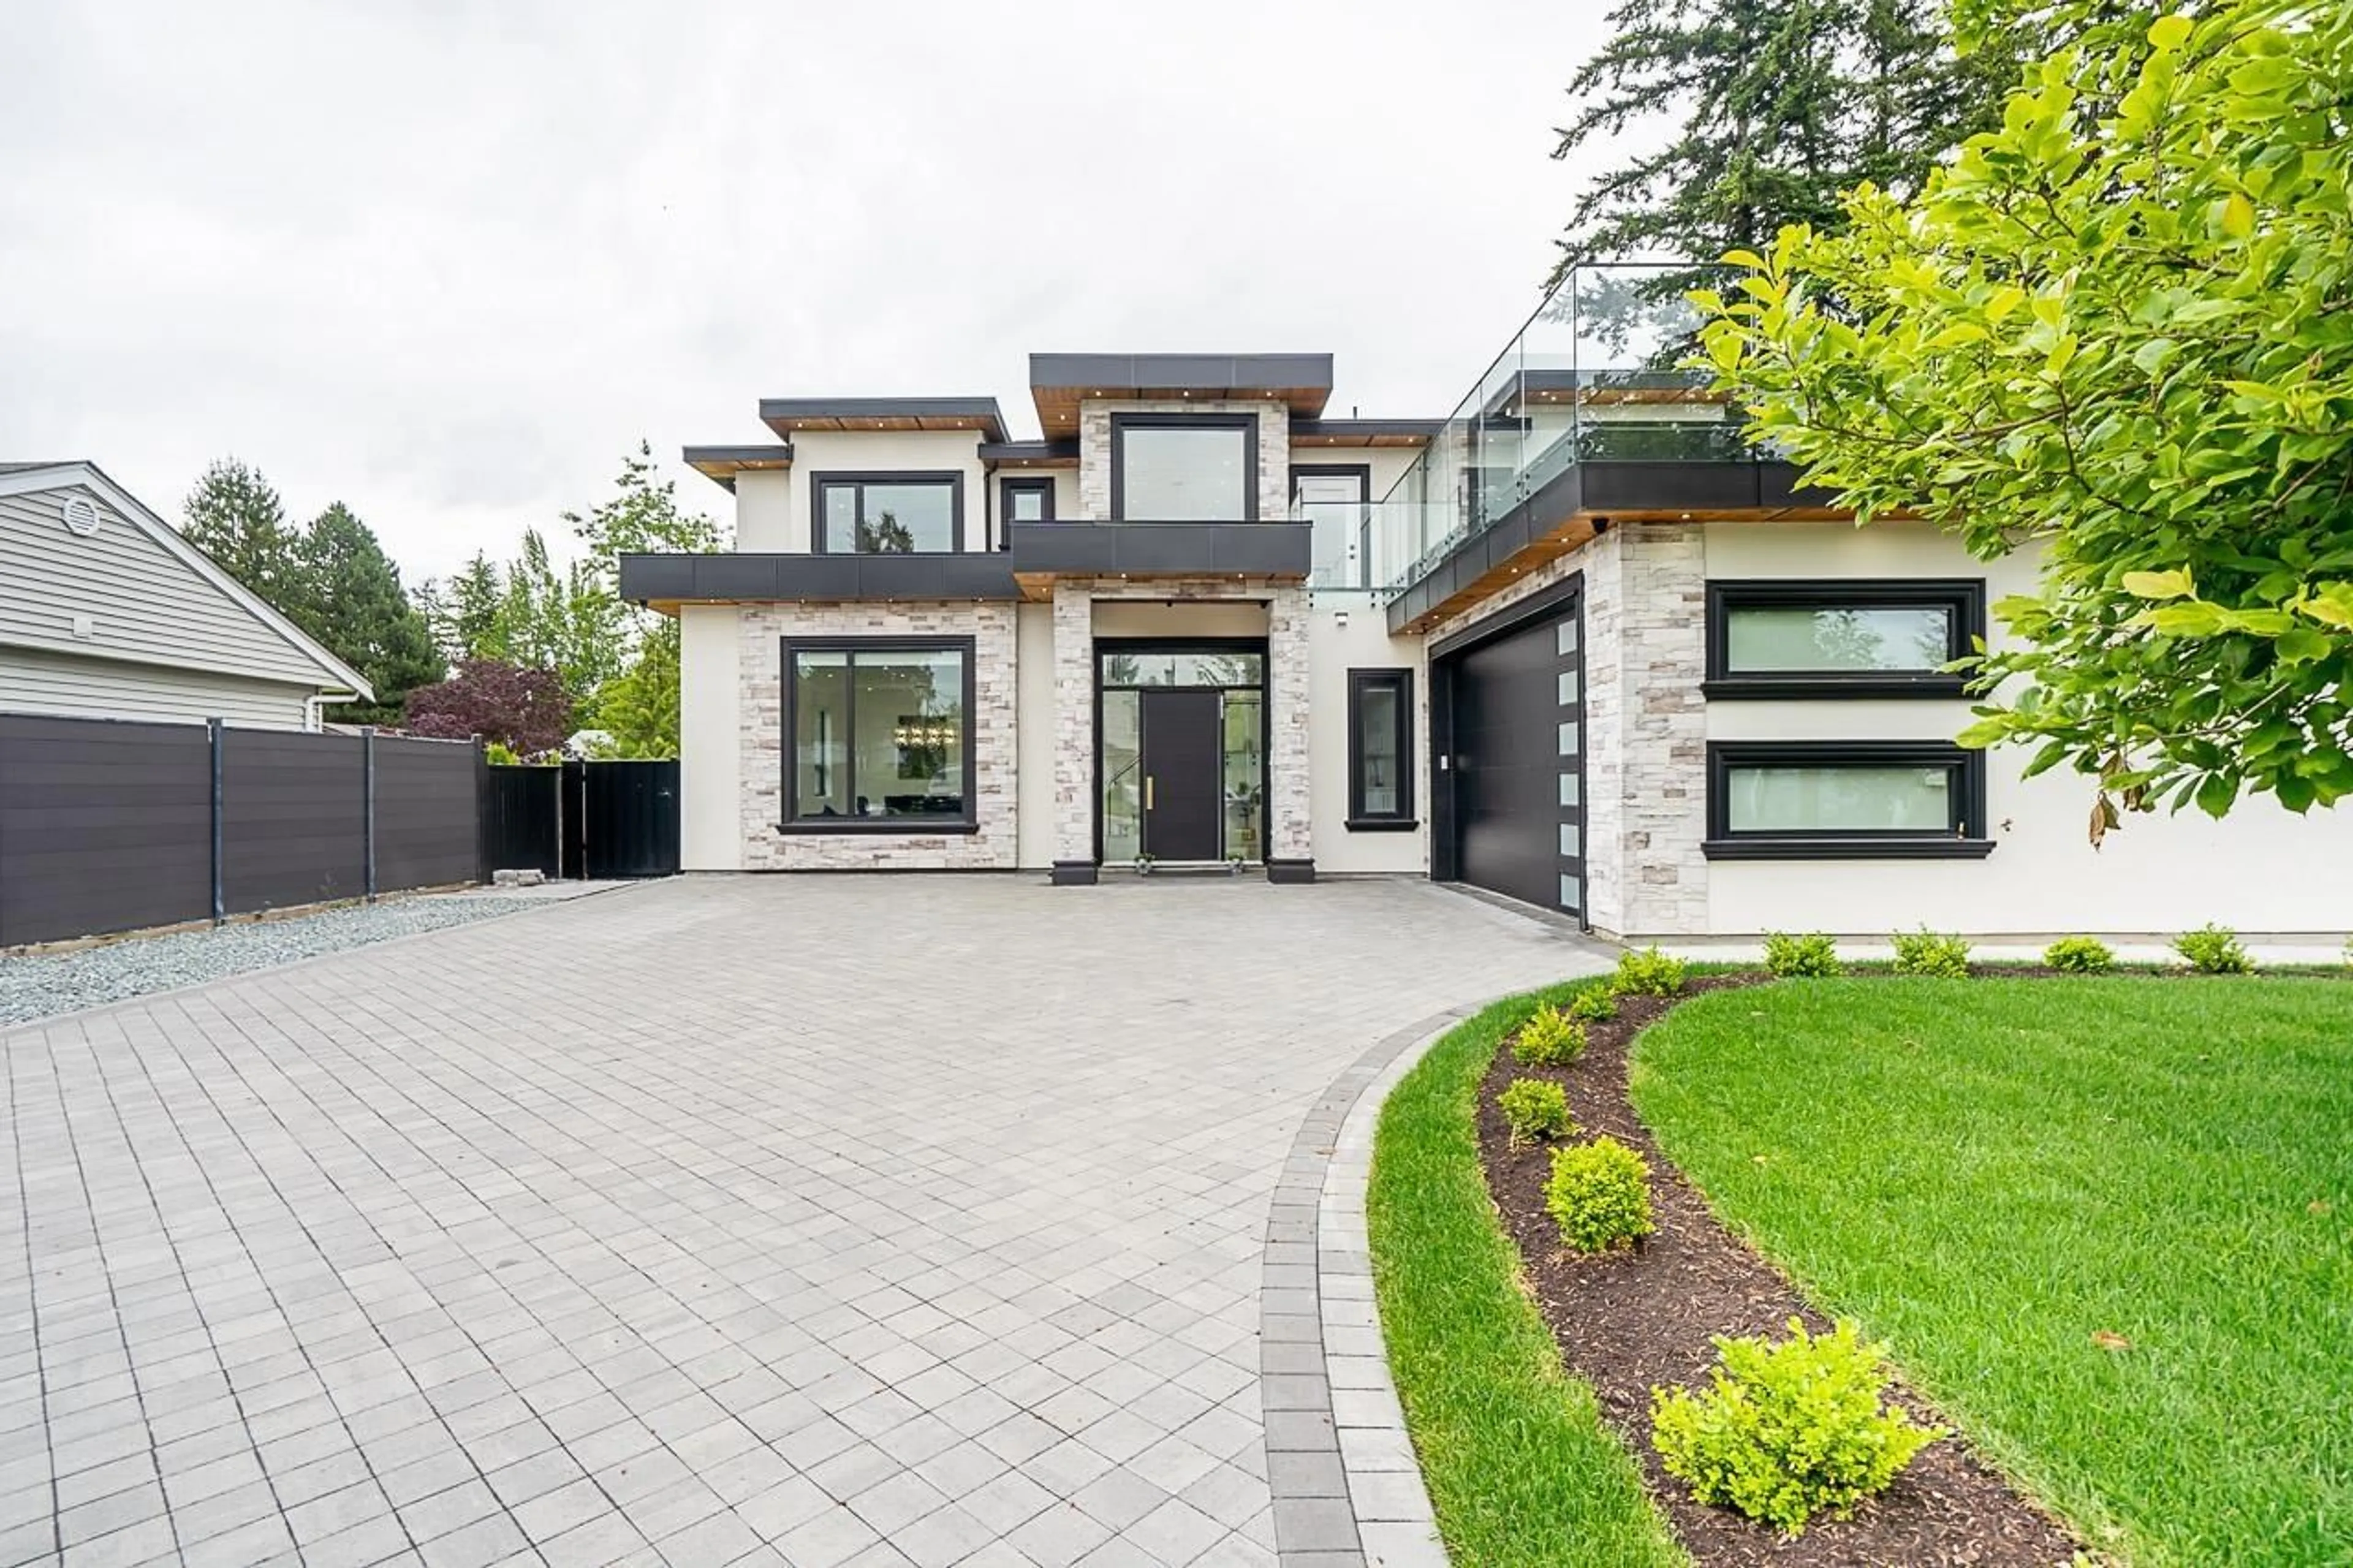 Home with brick exterior material for 6052 172 STREET, Surrey British Columbia V3S3Z7